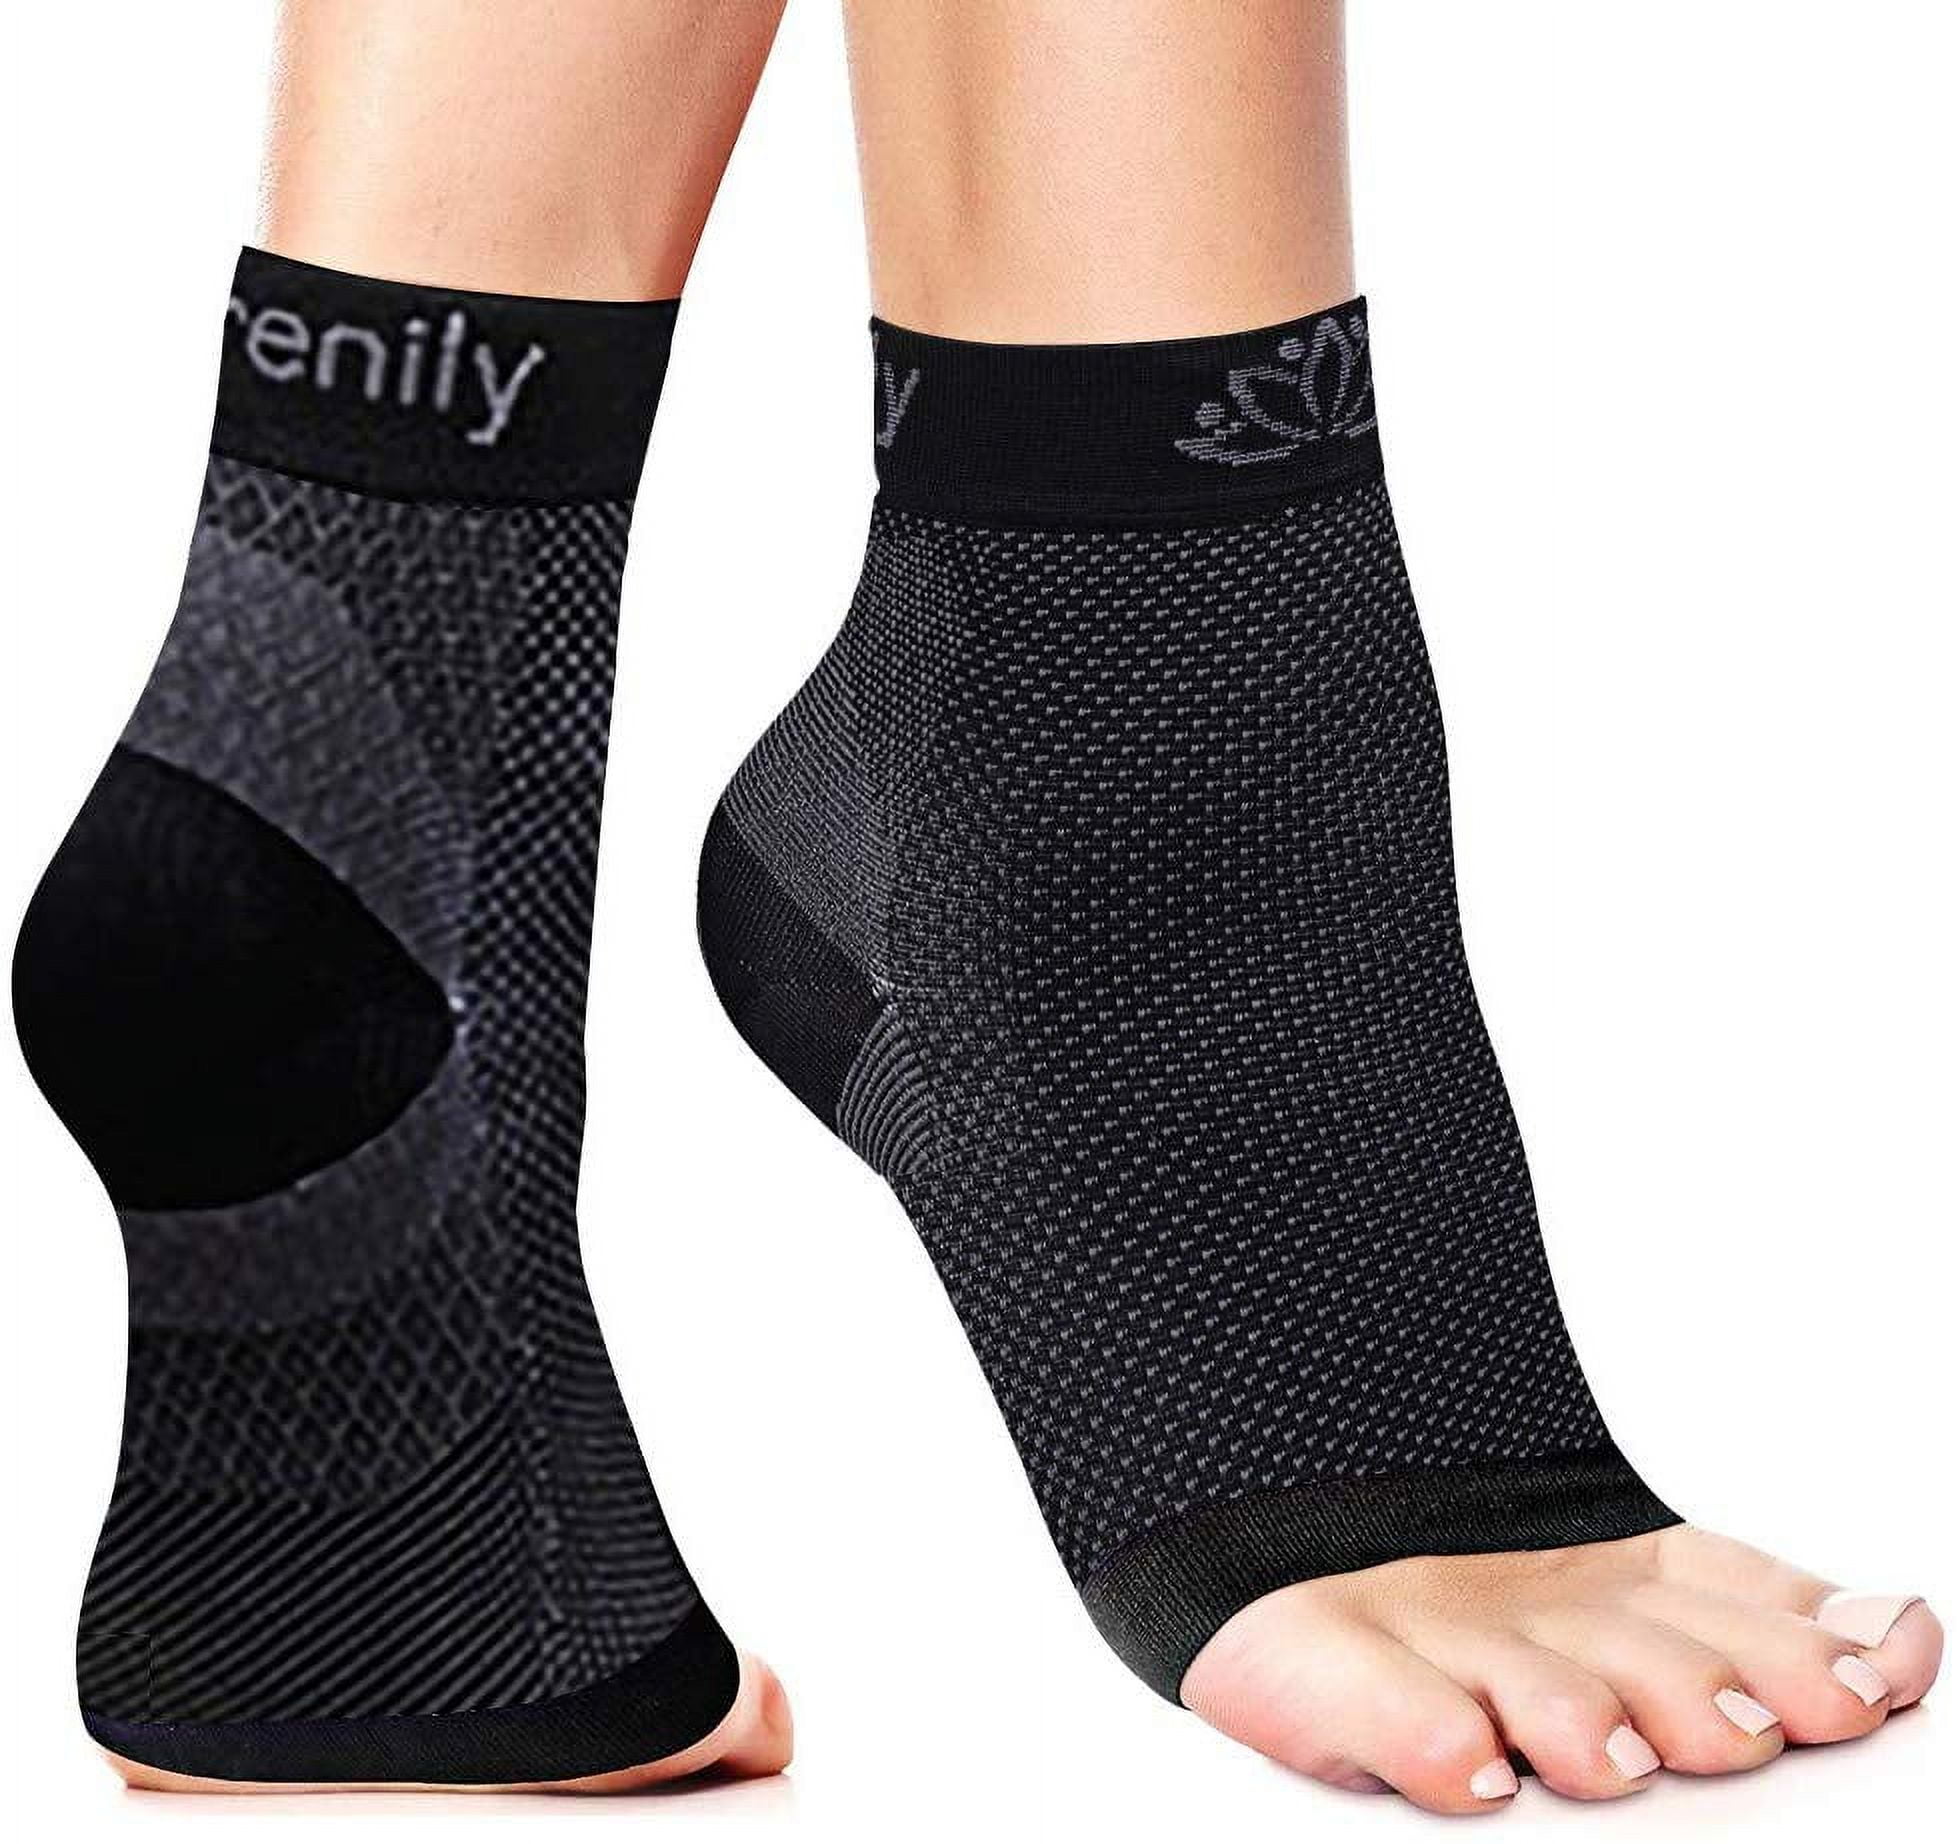 Serenily Plantar Faciitis Socks - Toeless Socks for Foot Pain & Plantar  Faciitis. Ankle Compression Socks for Arch Support & Achilles Tendonitis.  Foot